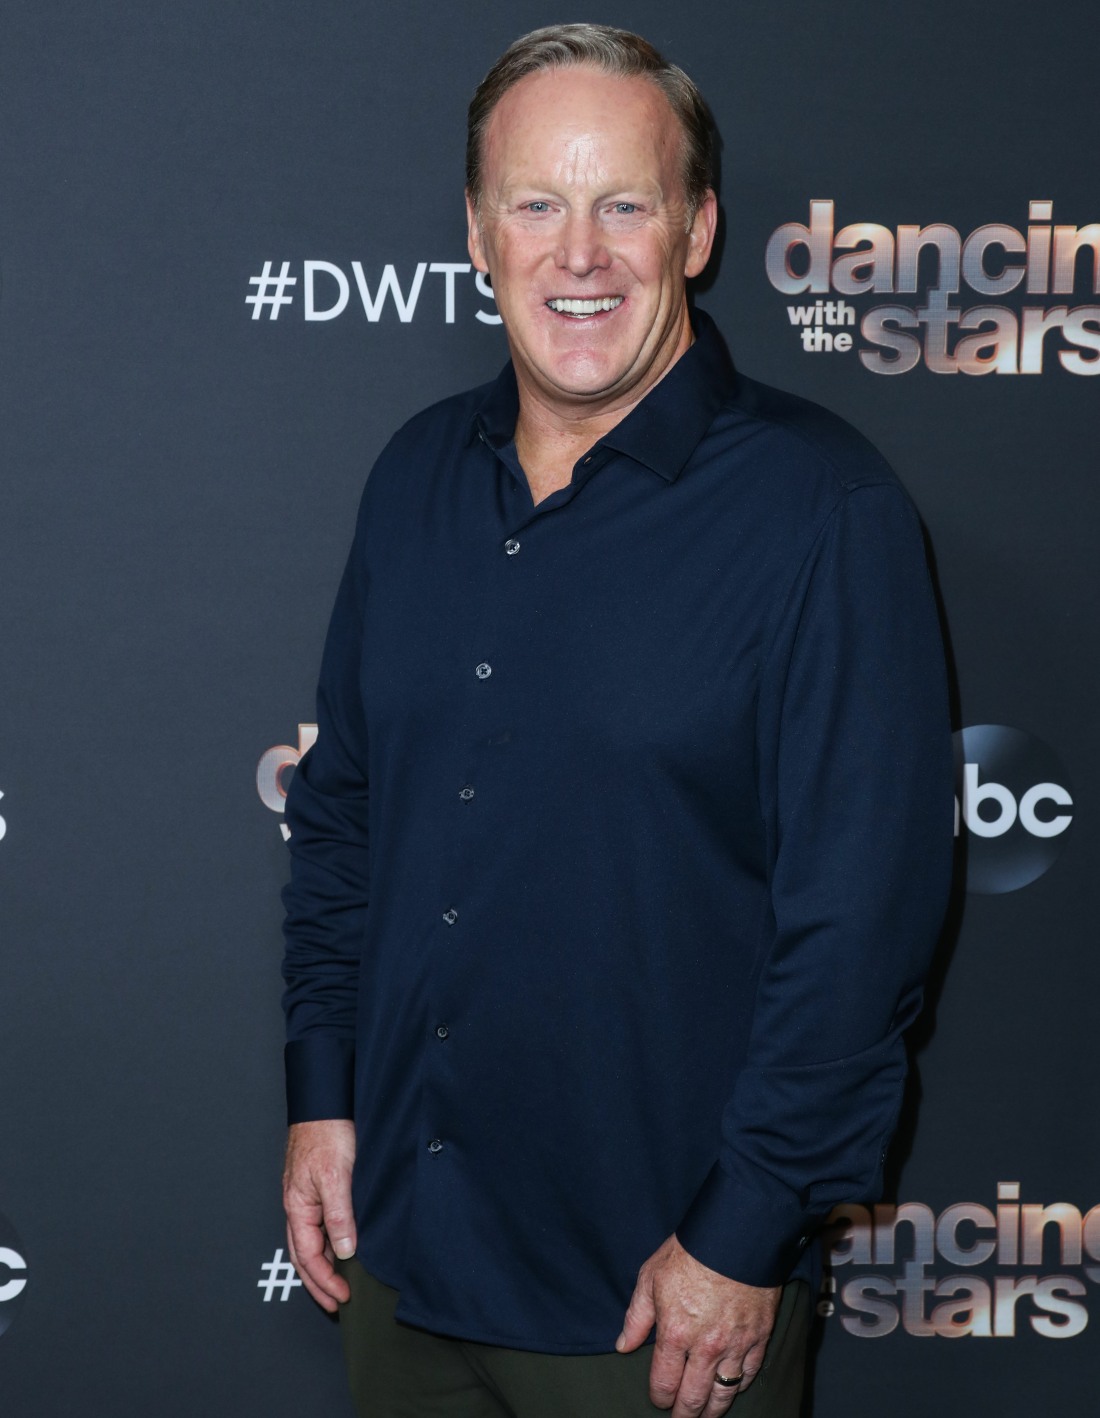 Former White House Press Secretary Sean Spicer arrives at ABC's 'Dancing With The Stars' Season 28 Top Six Finalists Party held at Dominique Ansel at The Grove on November 4, 2019 in Los Angeles, California, United States.